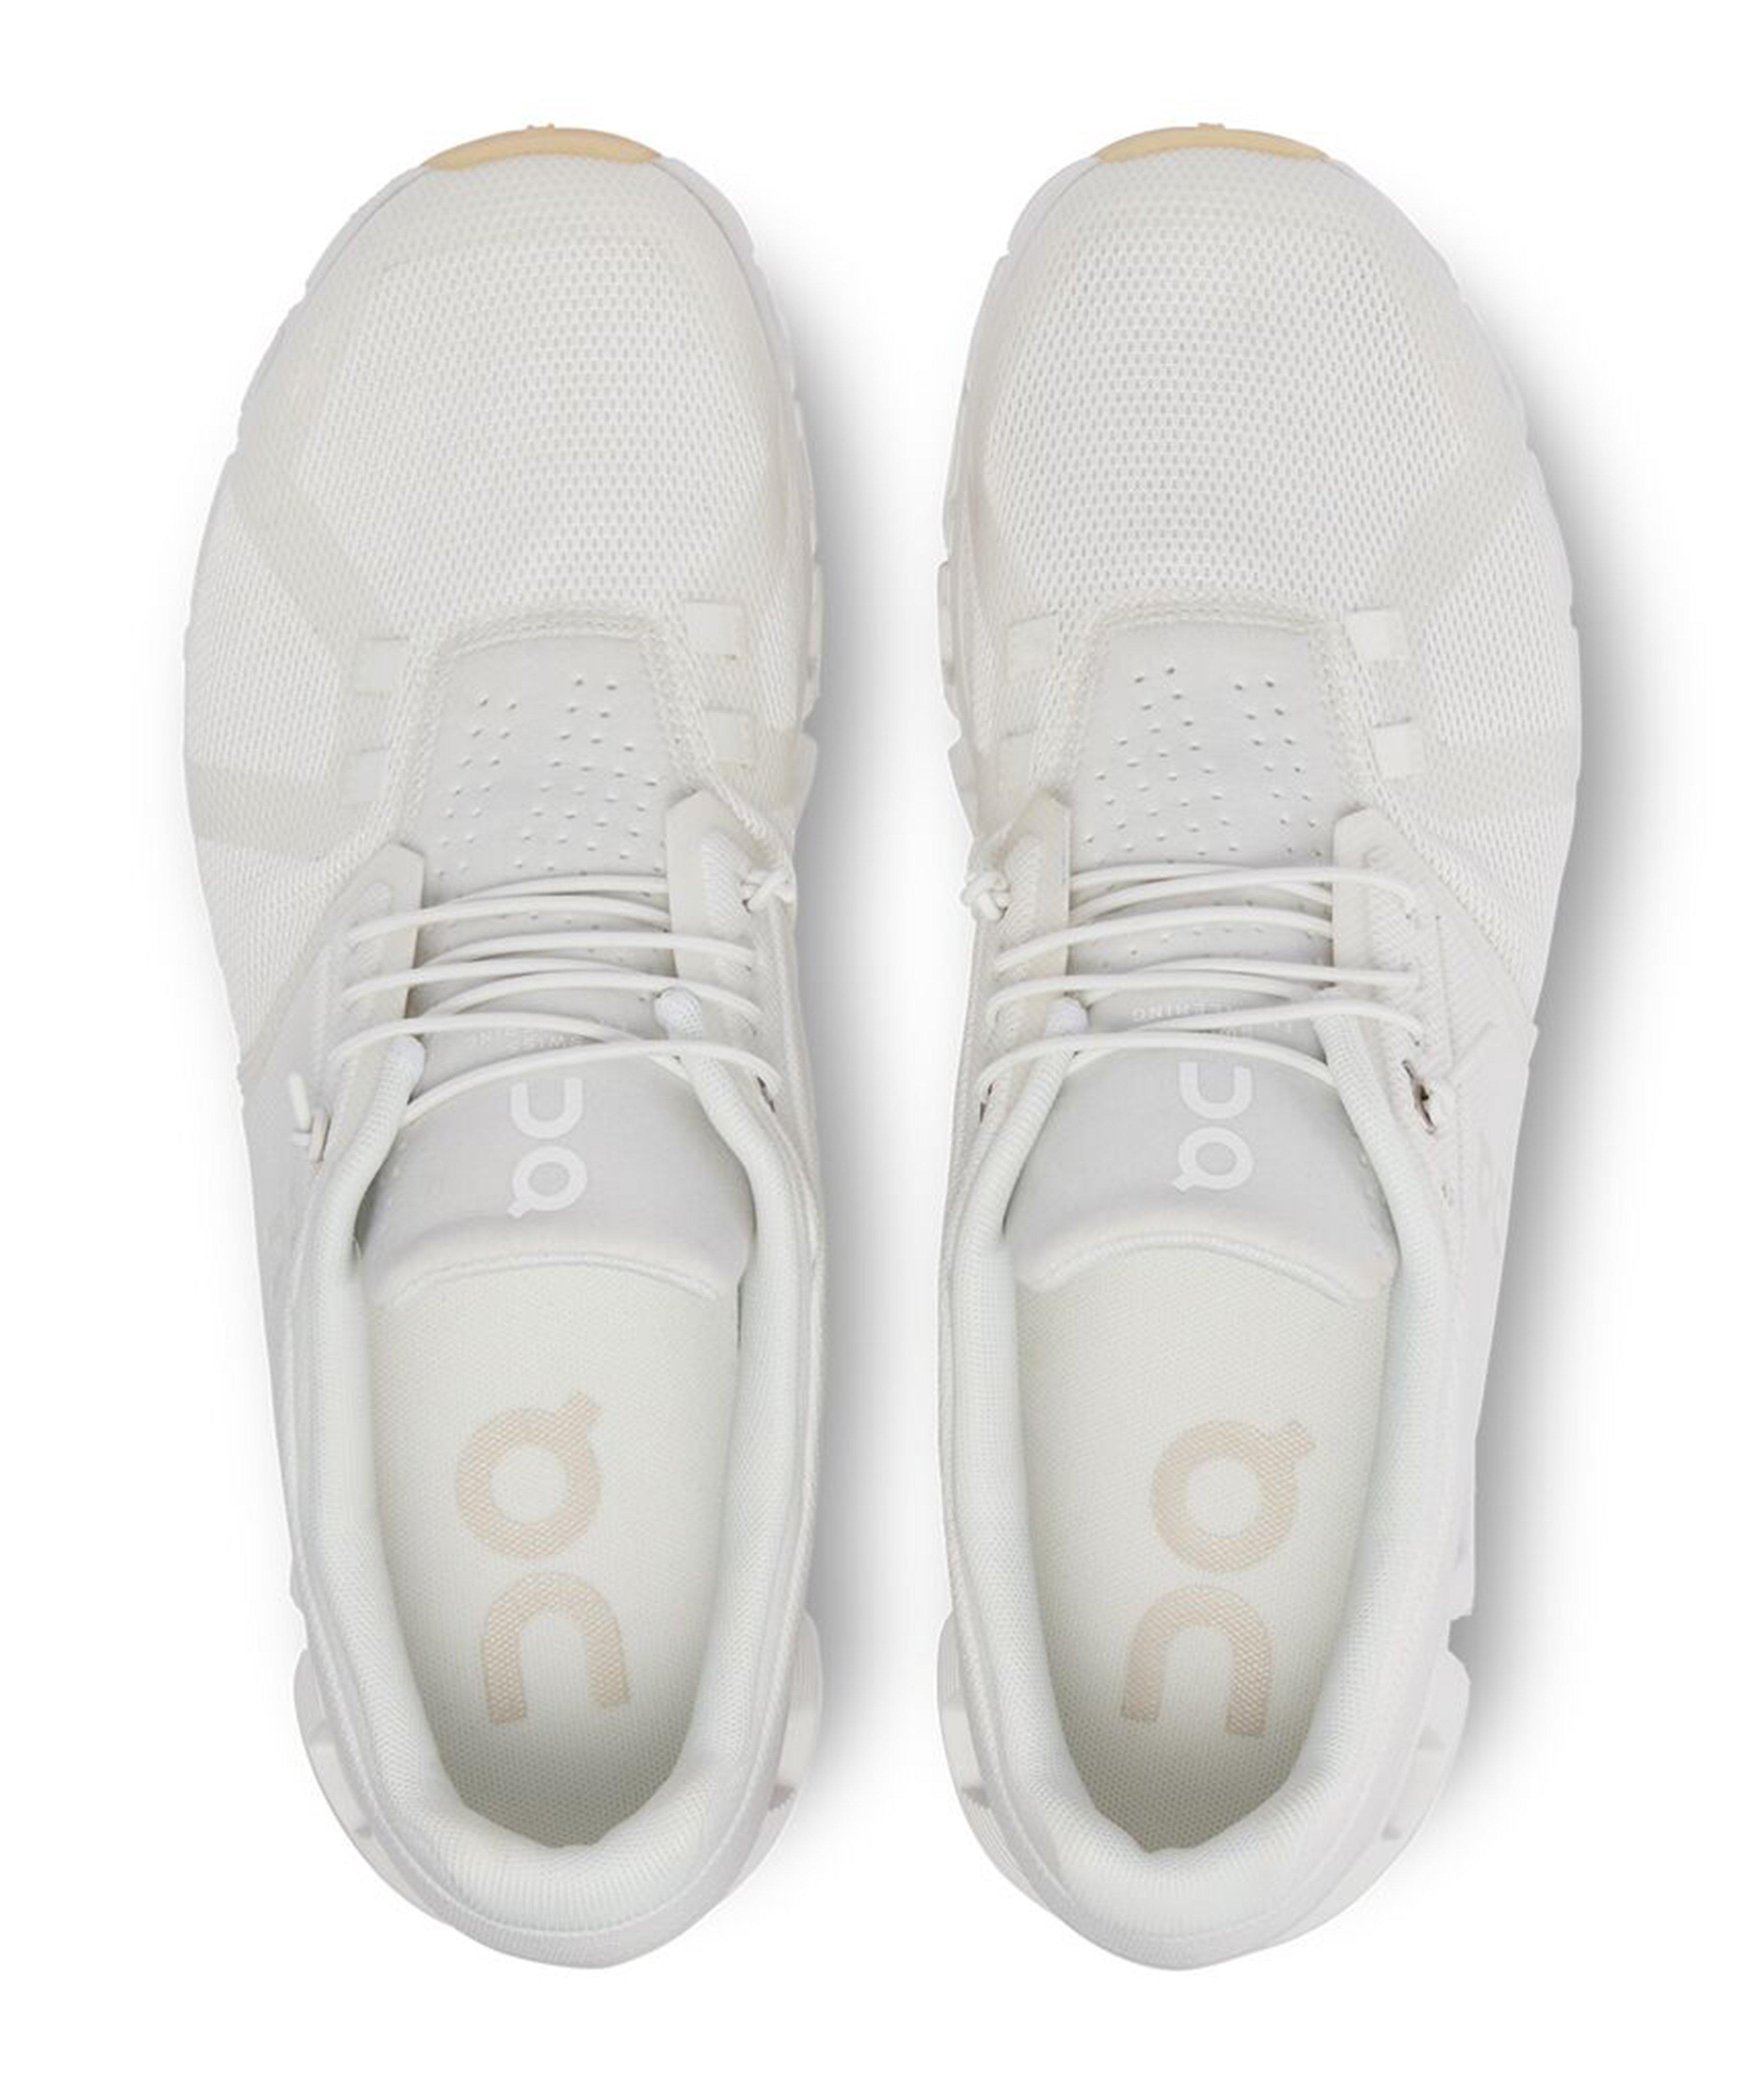 Cloud 5 Undyed Running Shoes image 2